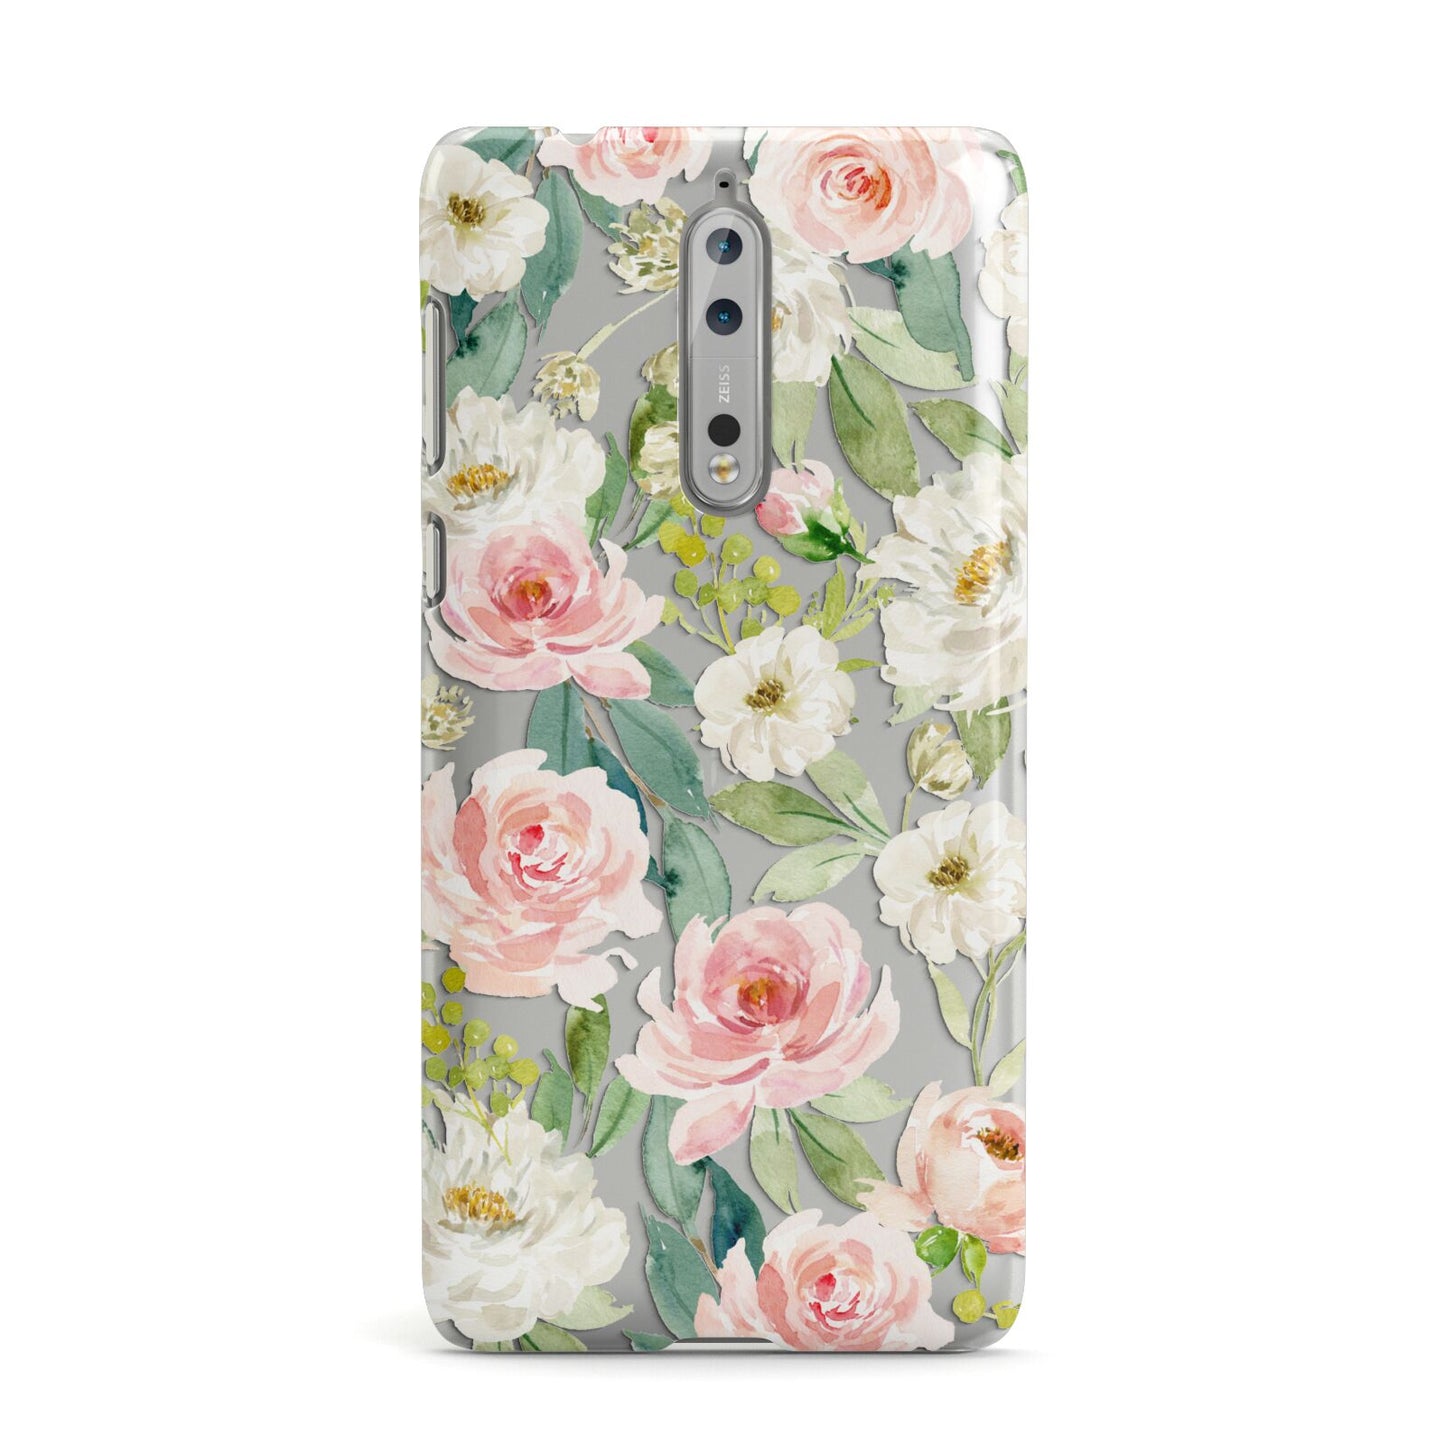 Watercolour Peonies Roses and Foliage Nokia Case